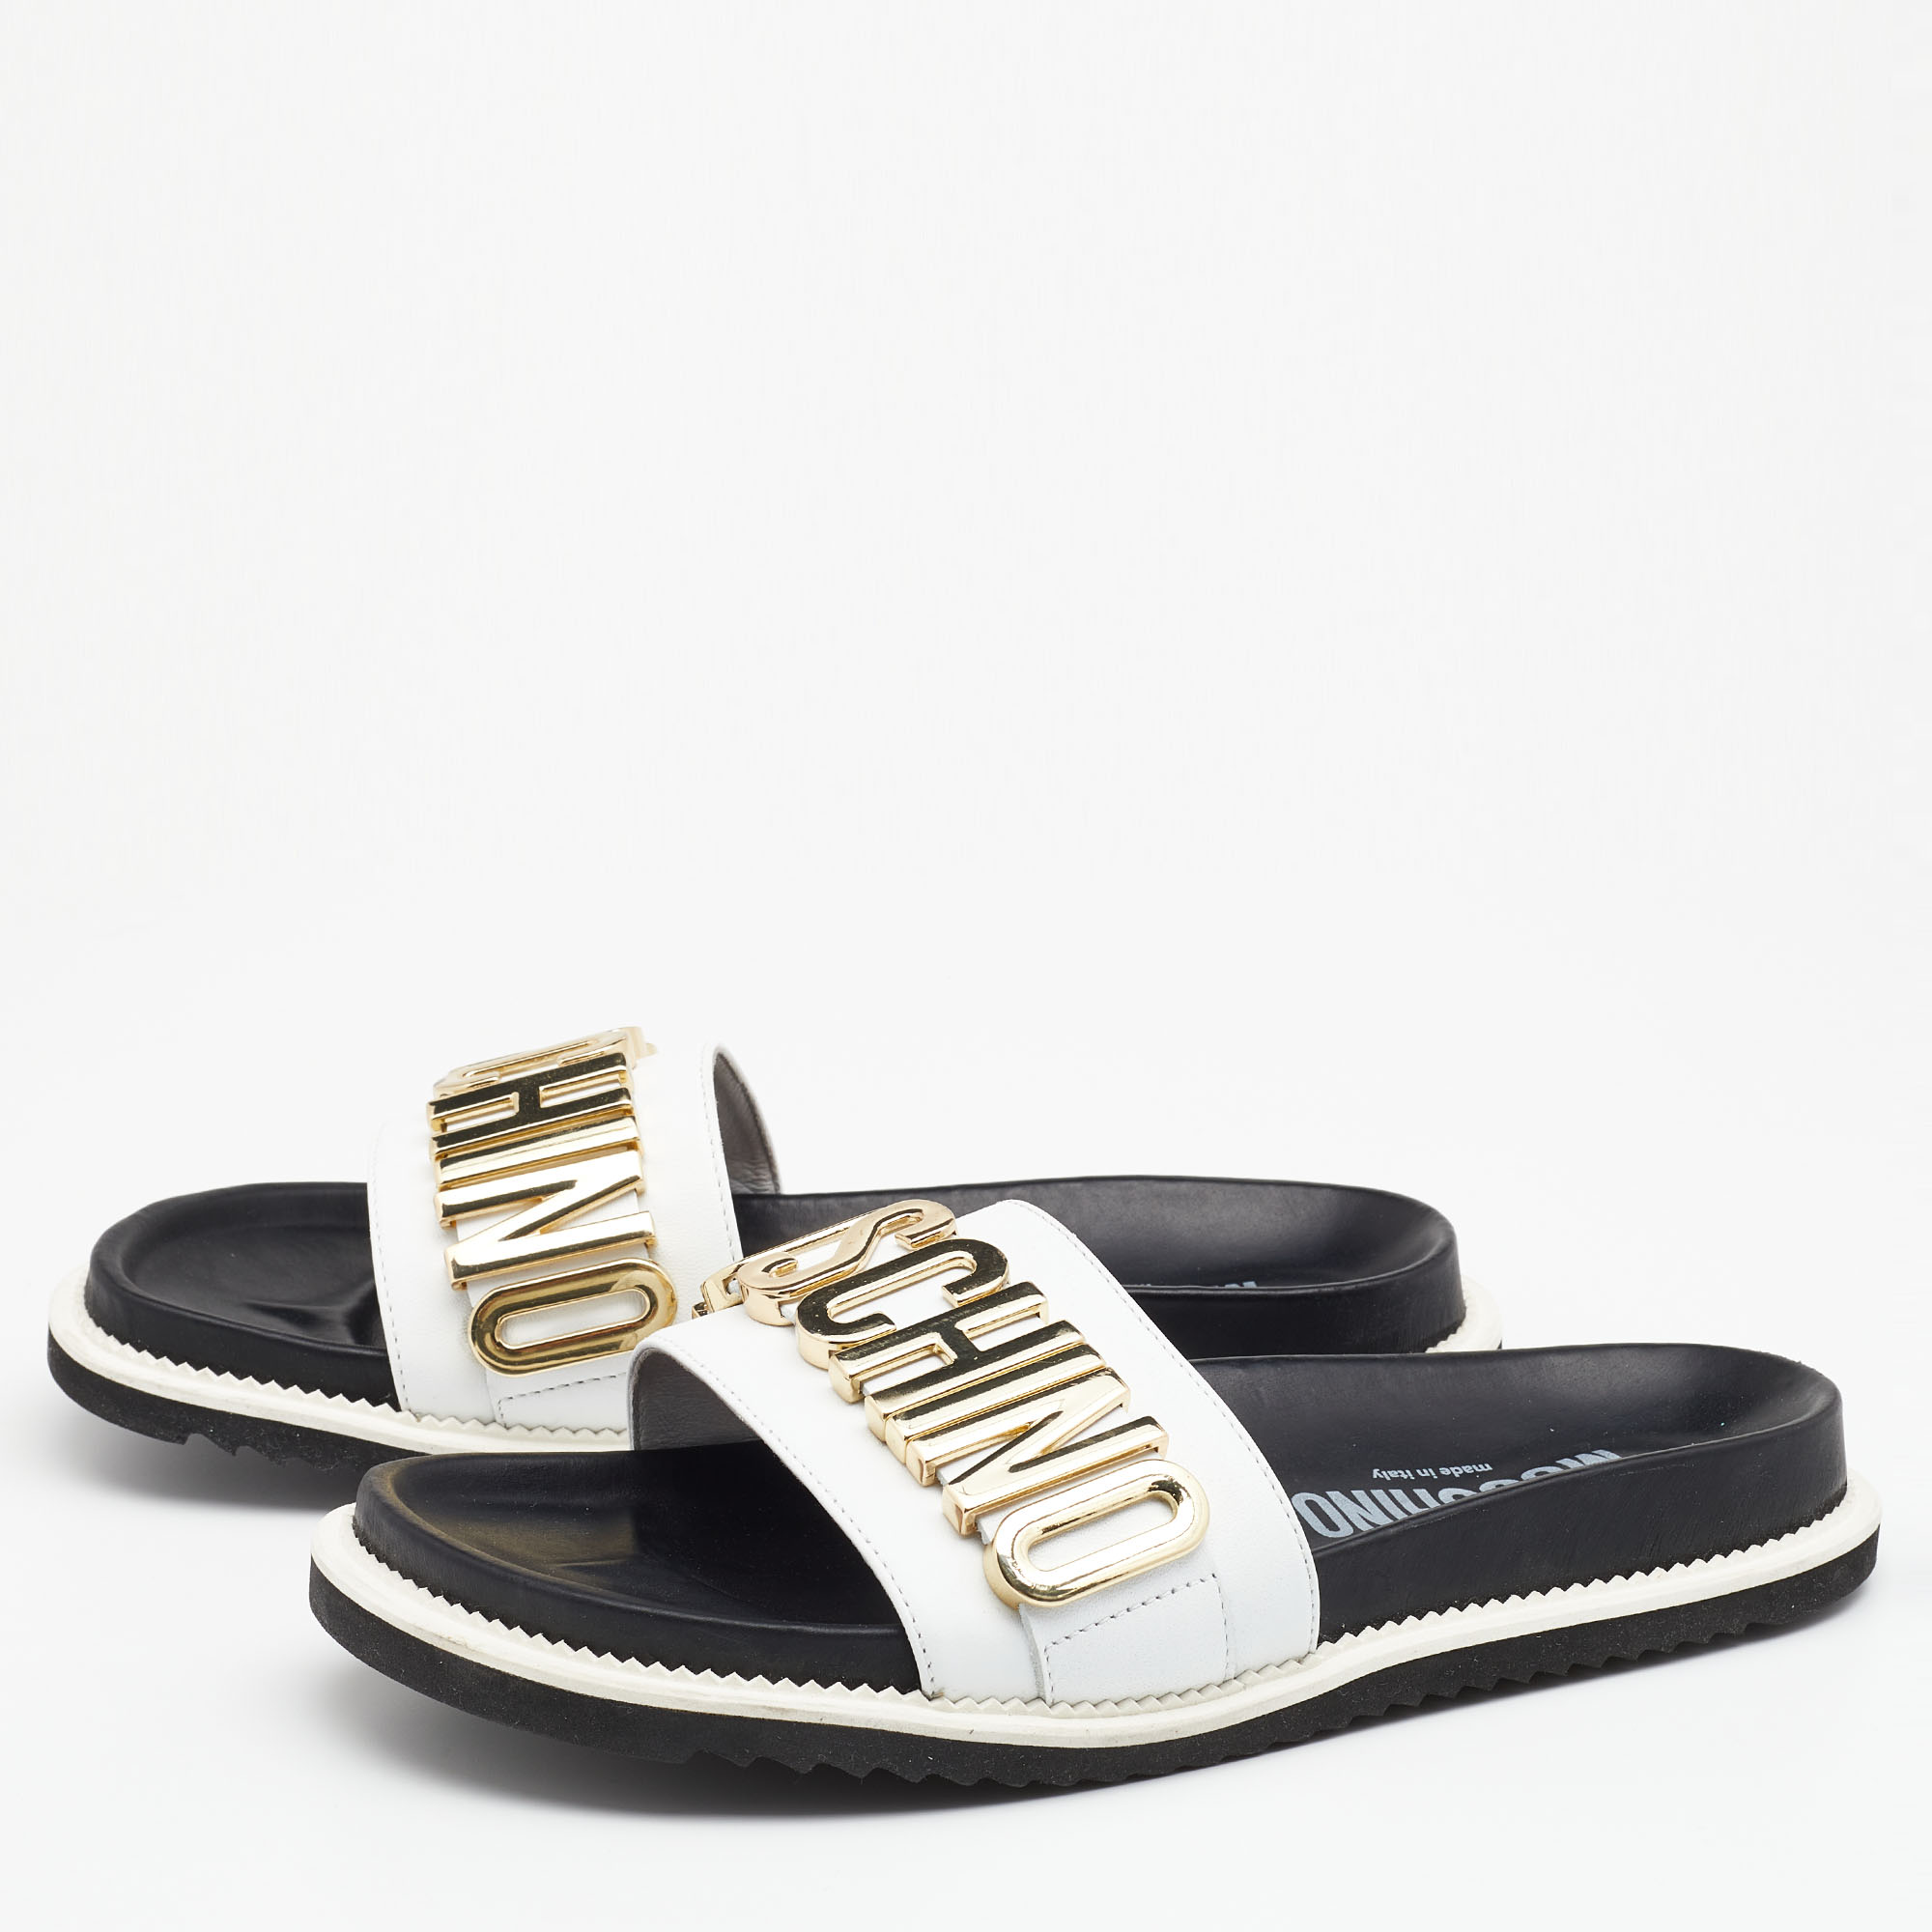 

Moschino White/Black Leather Logo Plaque Flat Slide Sandals Size